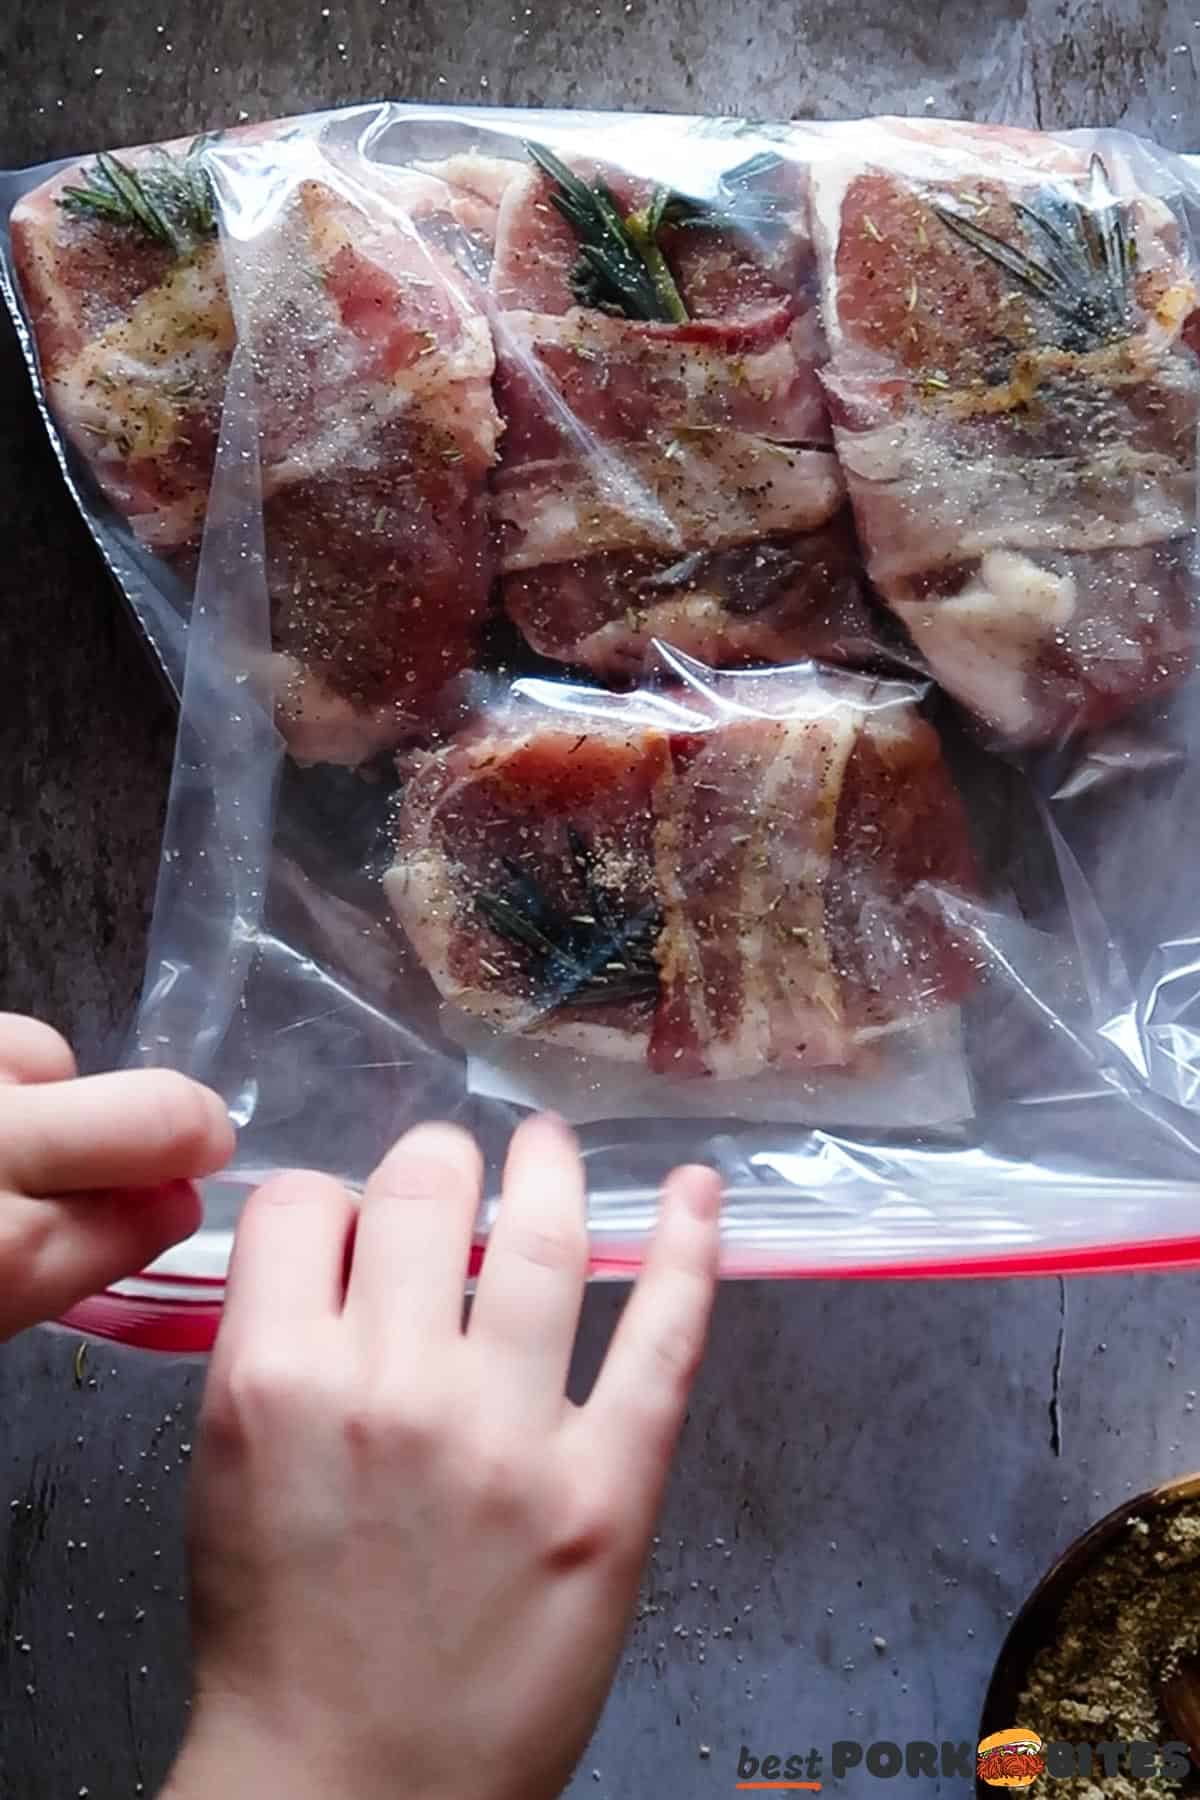 raw pork chops being sealed in a plastic bag